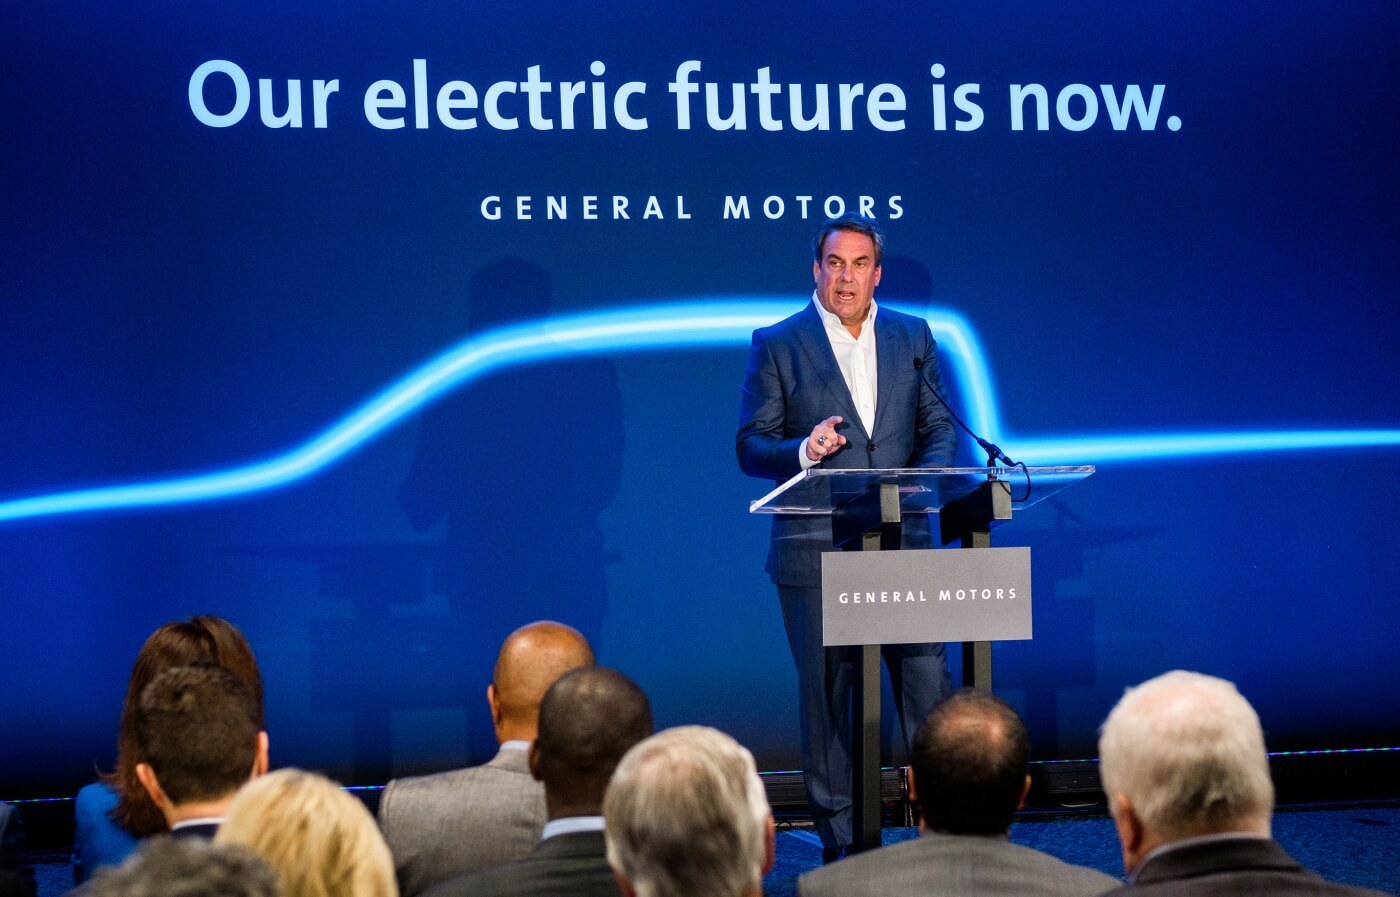 GM is investing $3 billion to build electric vehicles in Detroit